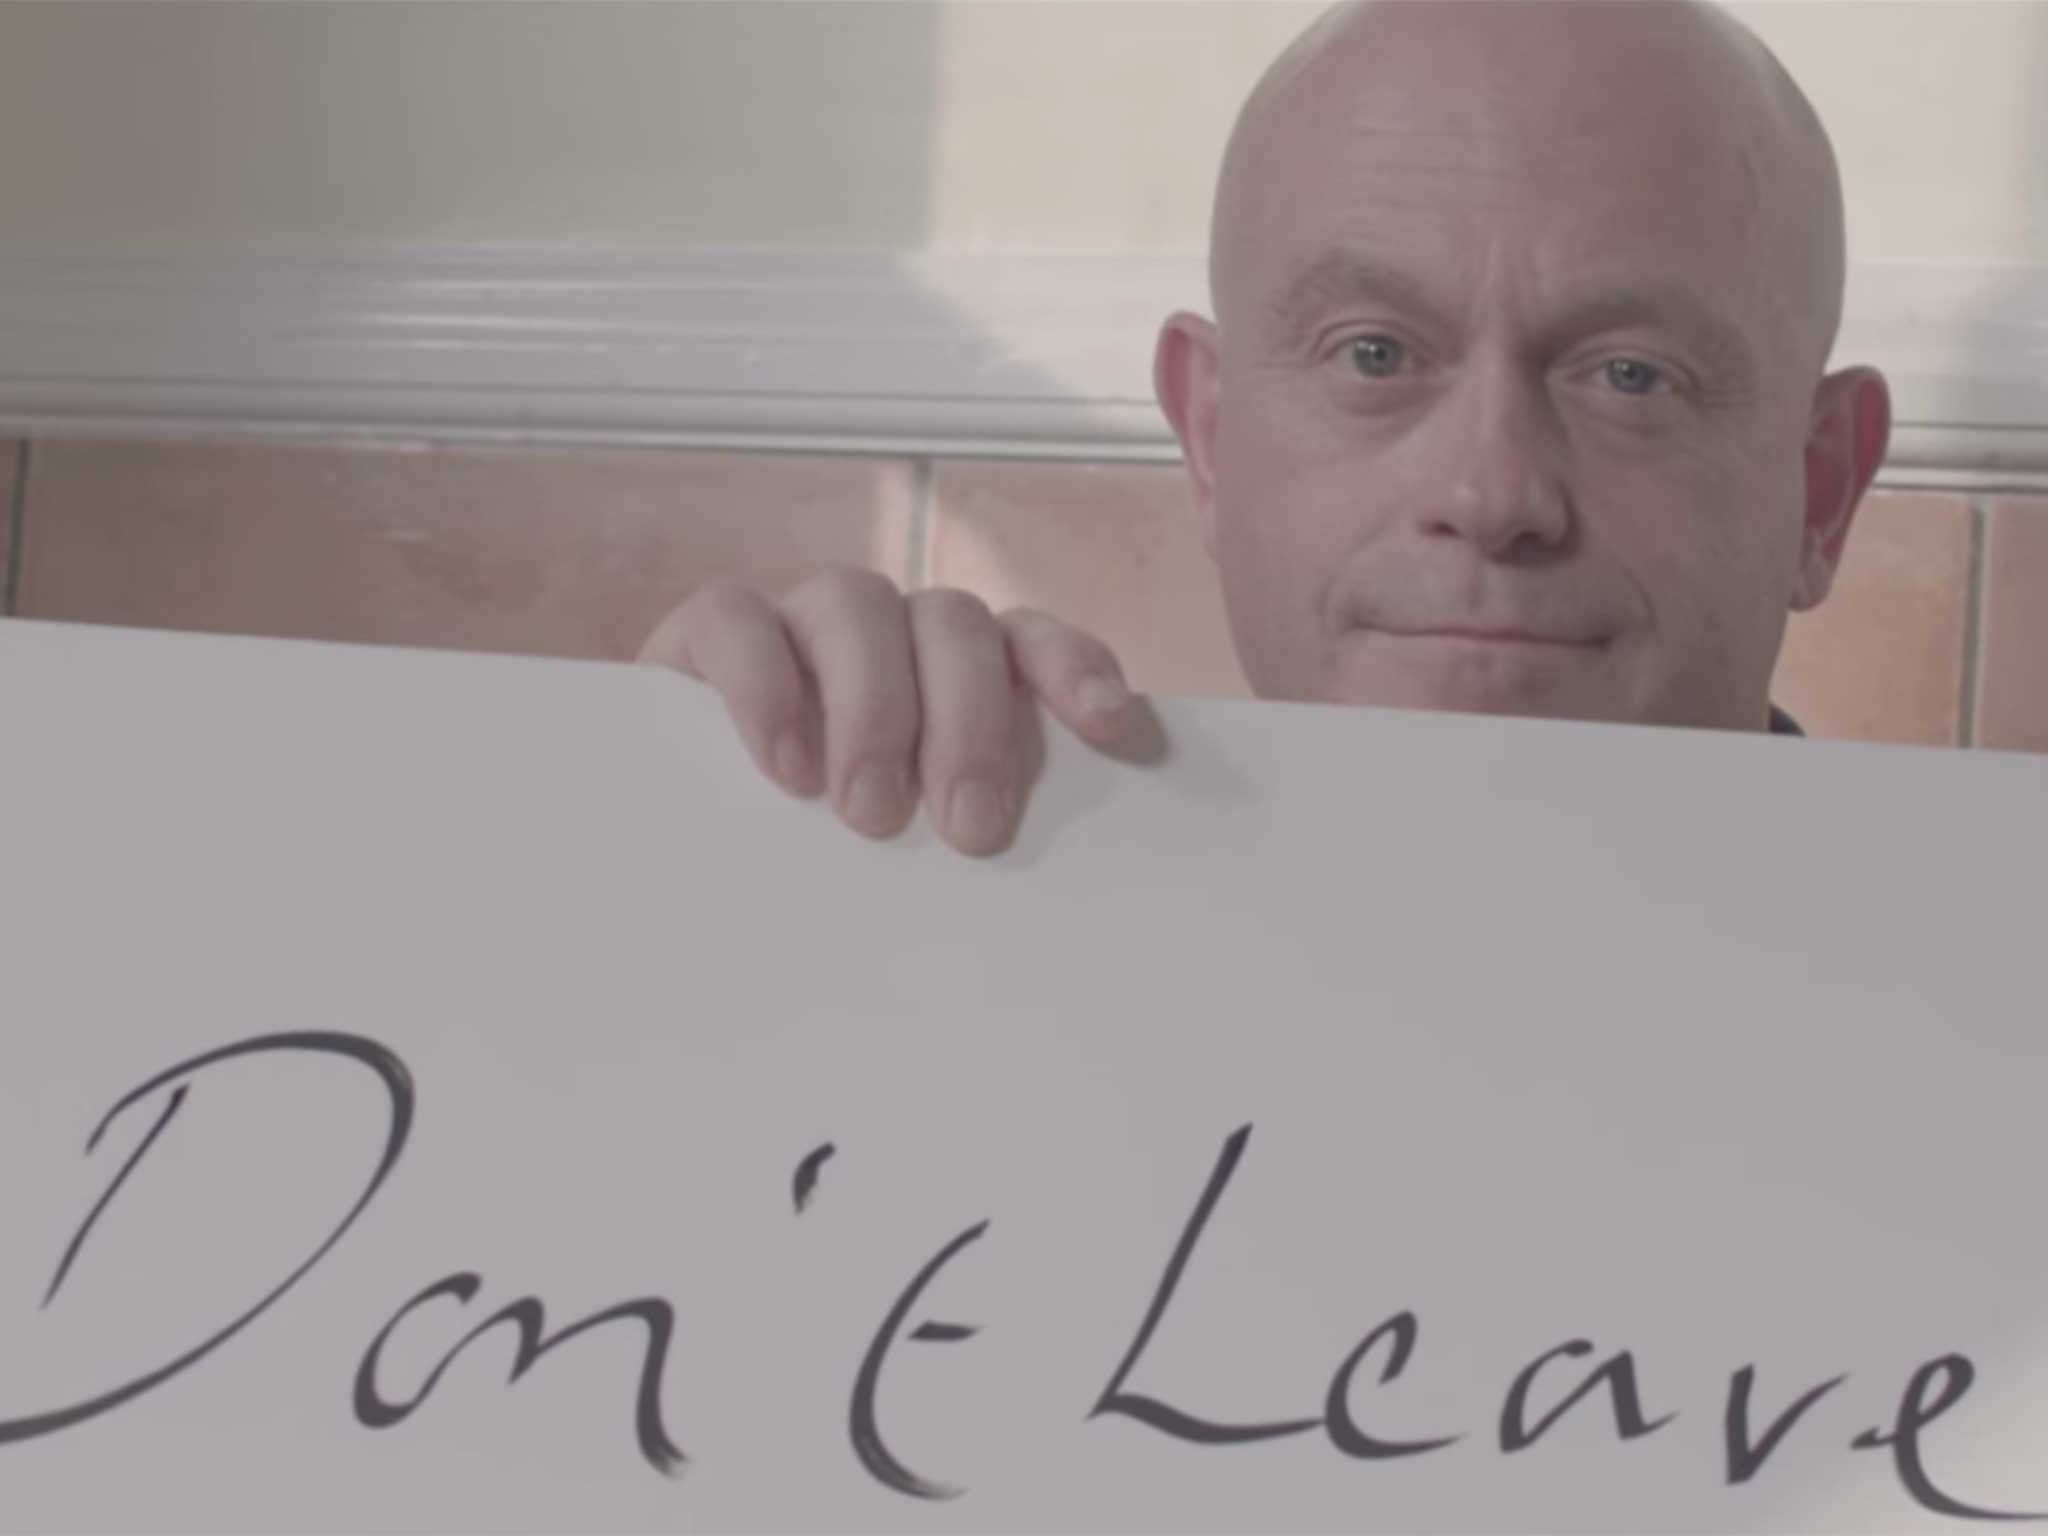 A still from the Let's Stay Together campaign's YouTube video, featuring Ross Kemp